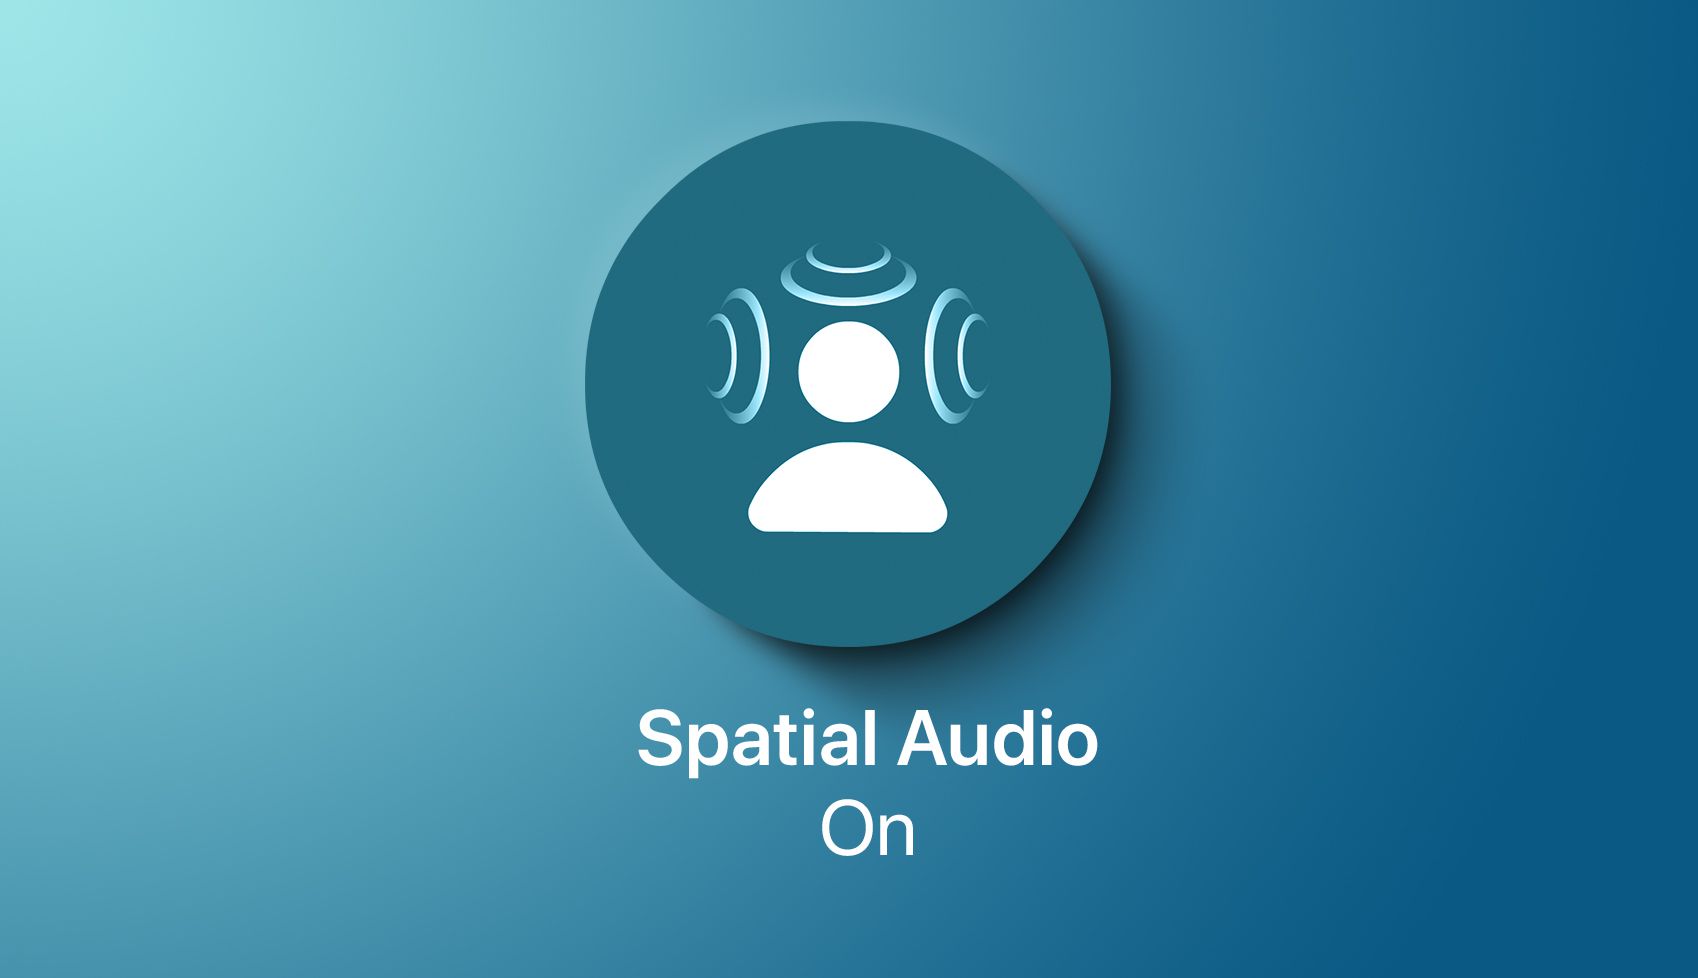 All applications that support Apple’s spatial audio feature